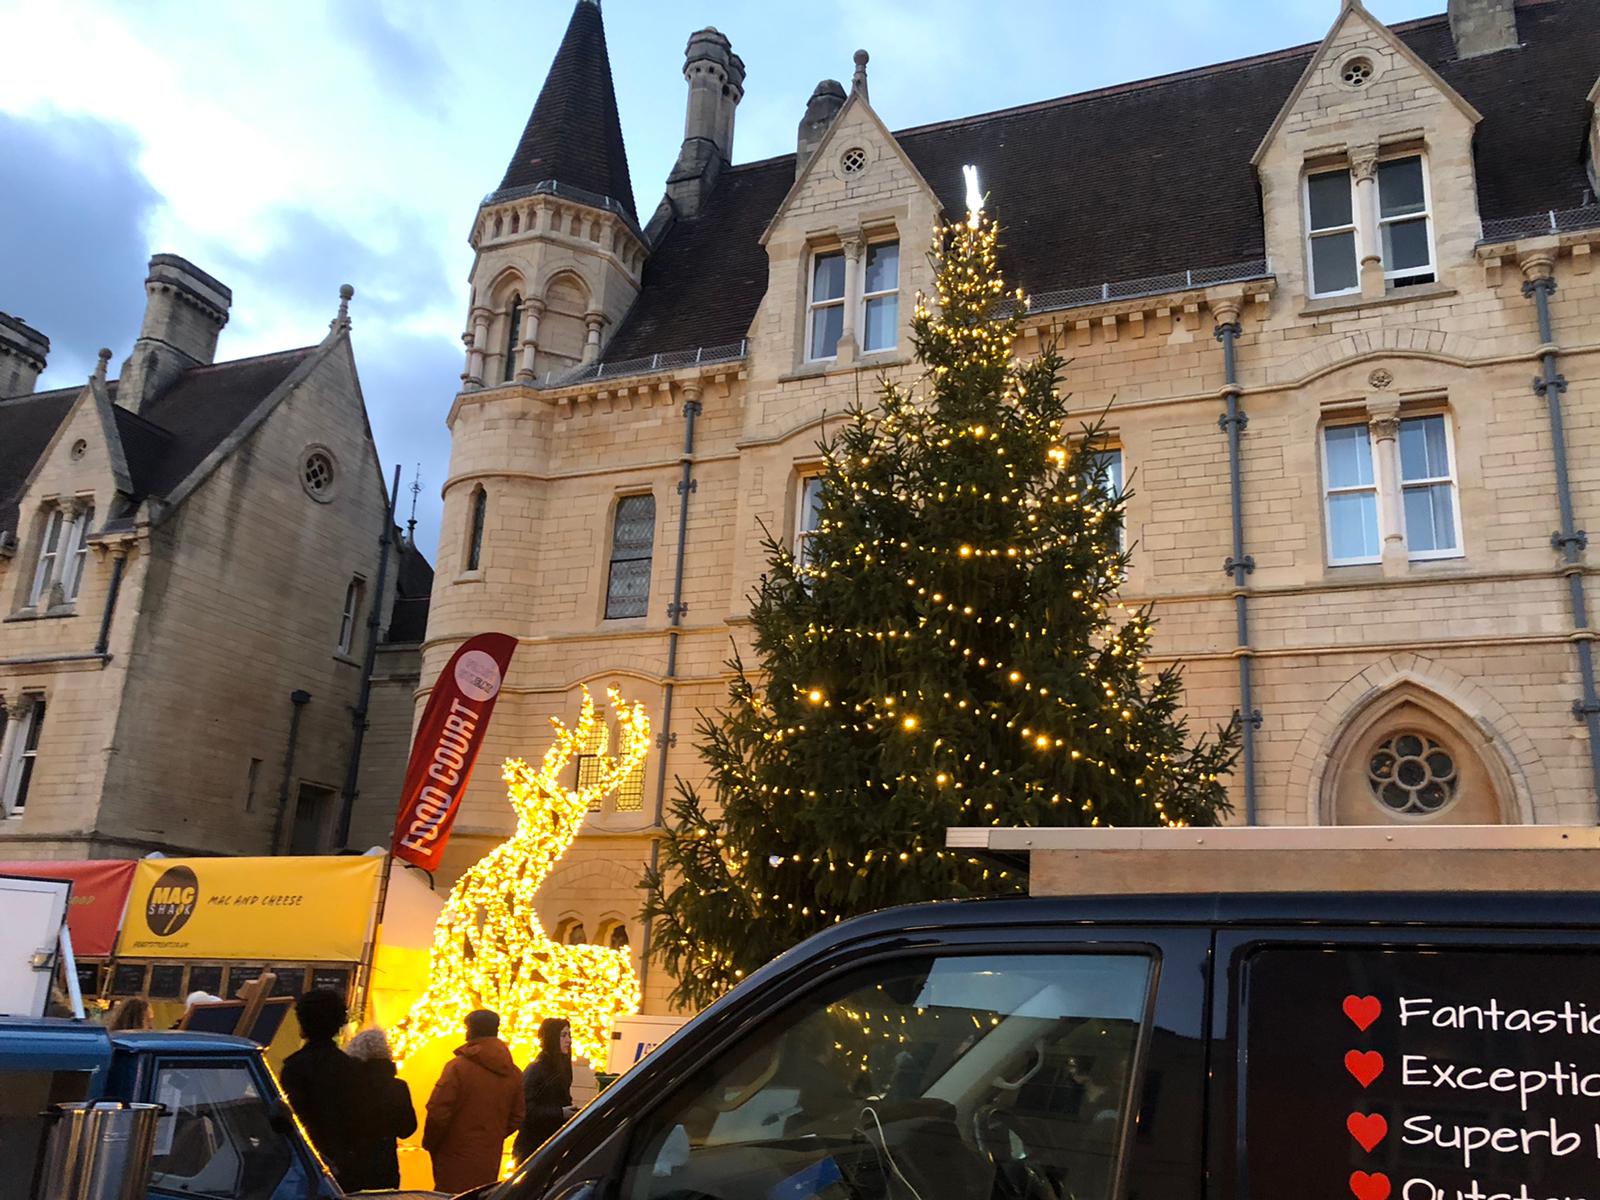 Balliol College with a large Christmas tree and reindeer sculpture.